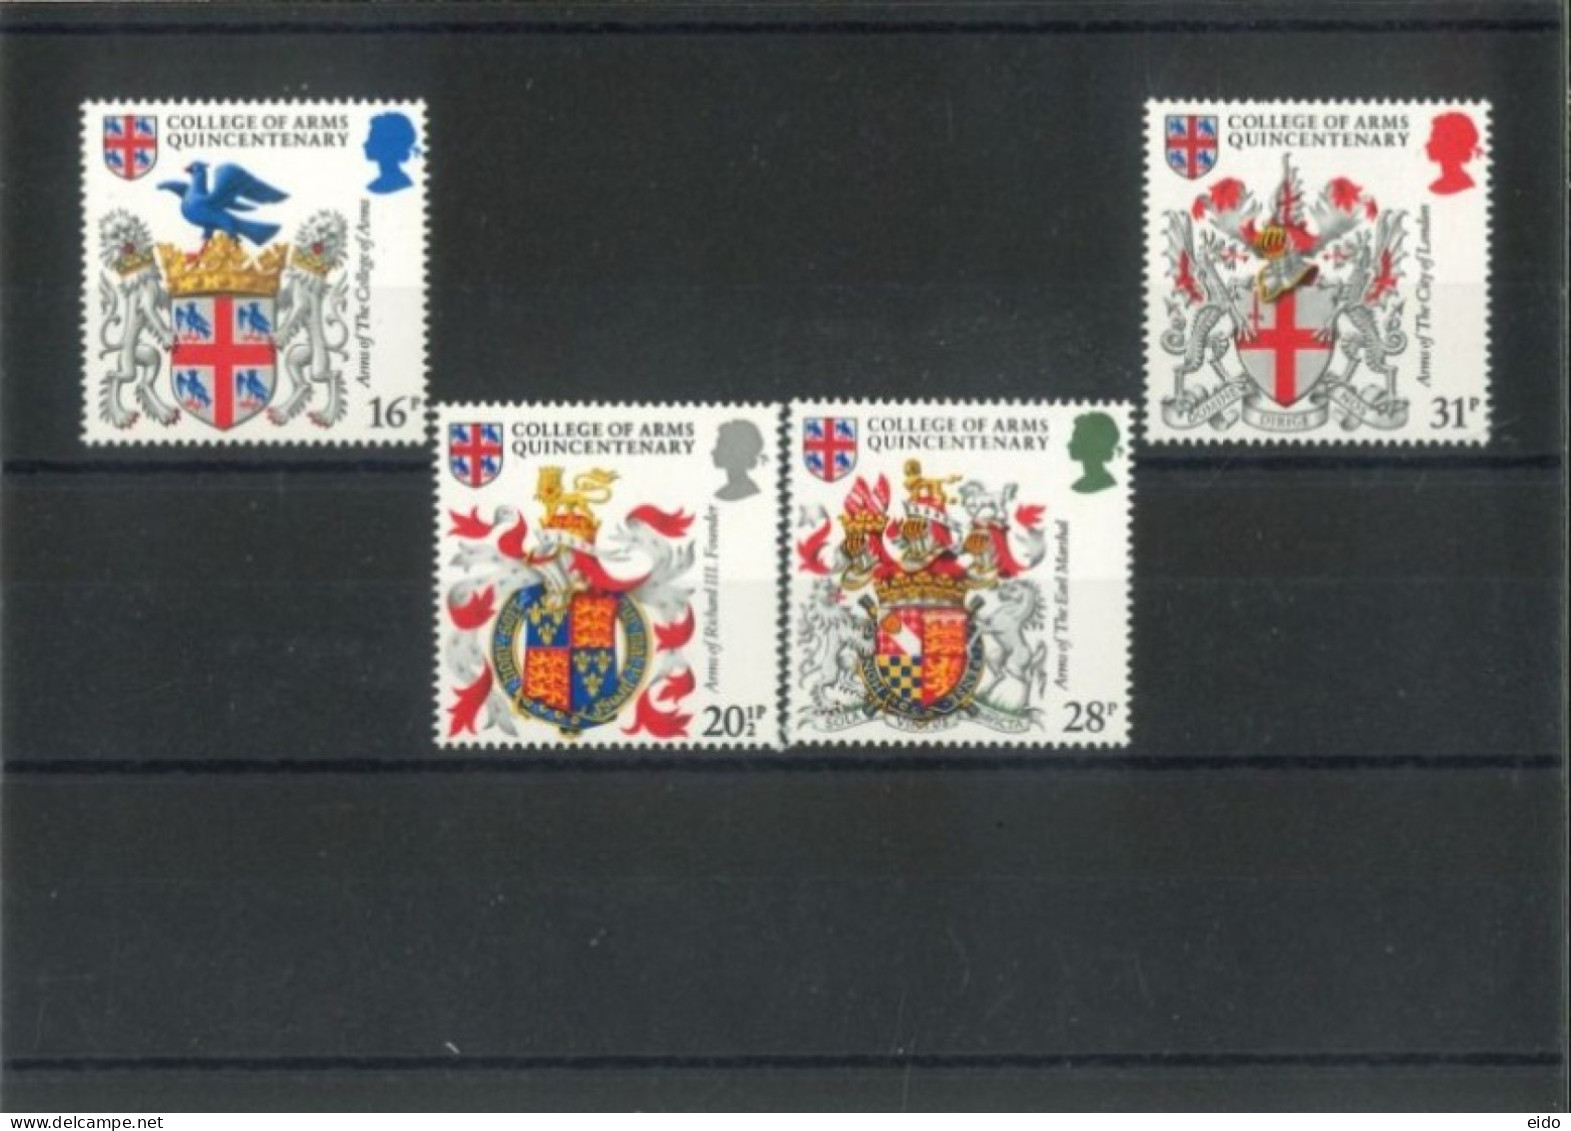 GREAT BRITAIN - 1984 - 500th ANNIV OF COLLEGE OF ARMS STAMPS COMPLETE SET OF 4, SG # 1236/39, UMM(**). - Universal Mail Stamps